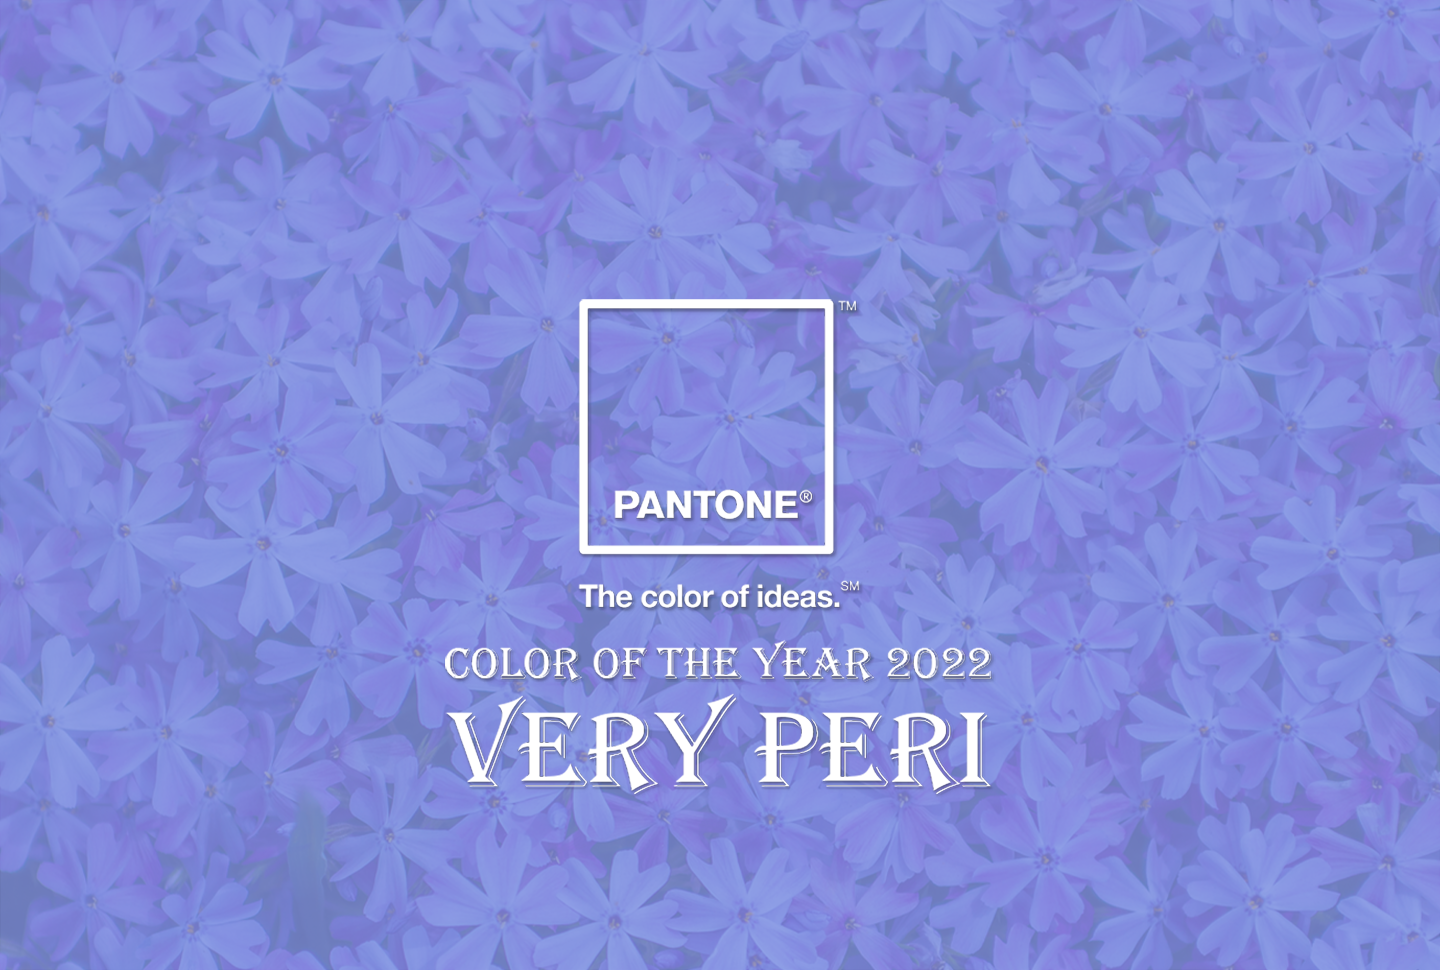 COLOR OF THE YEAR 2022 VERY PERI